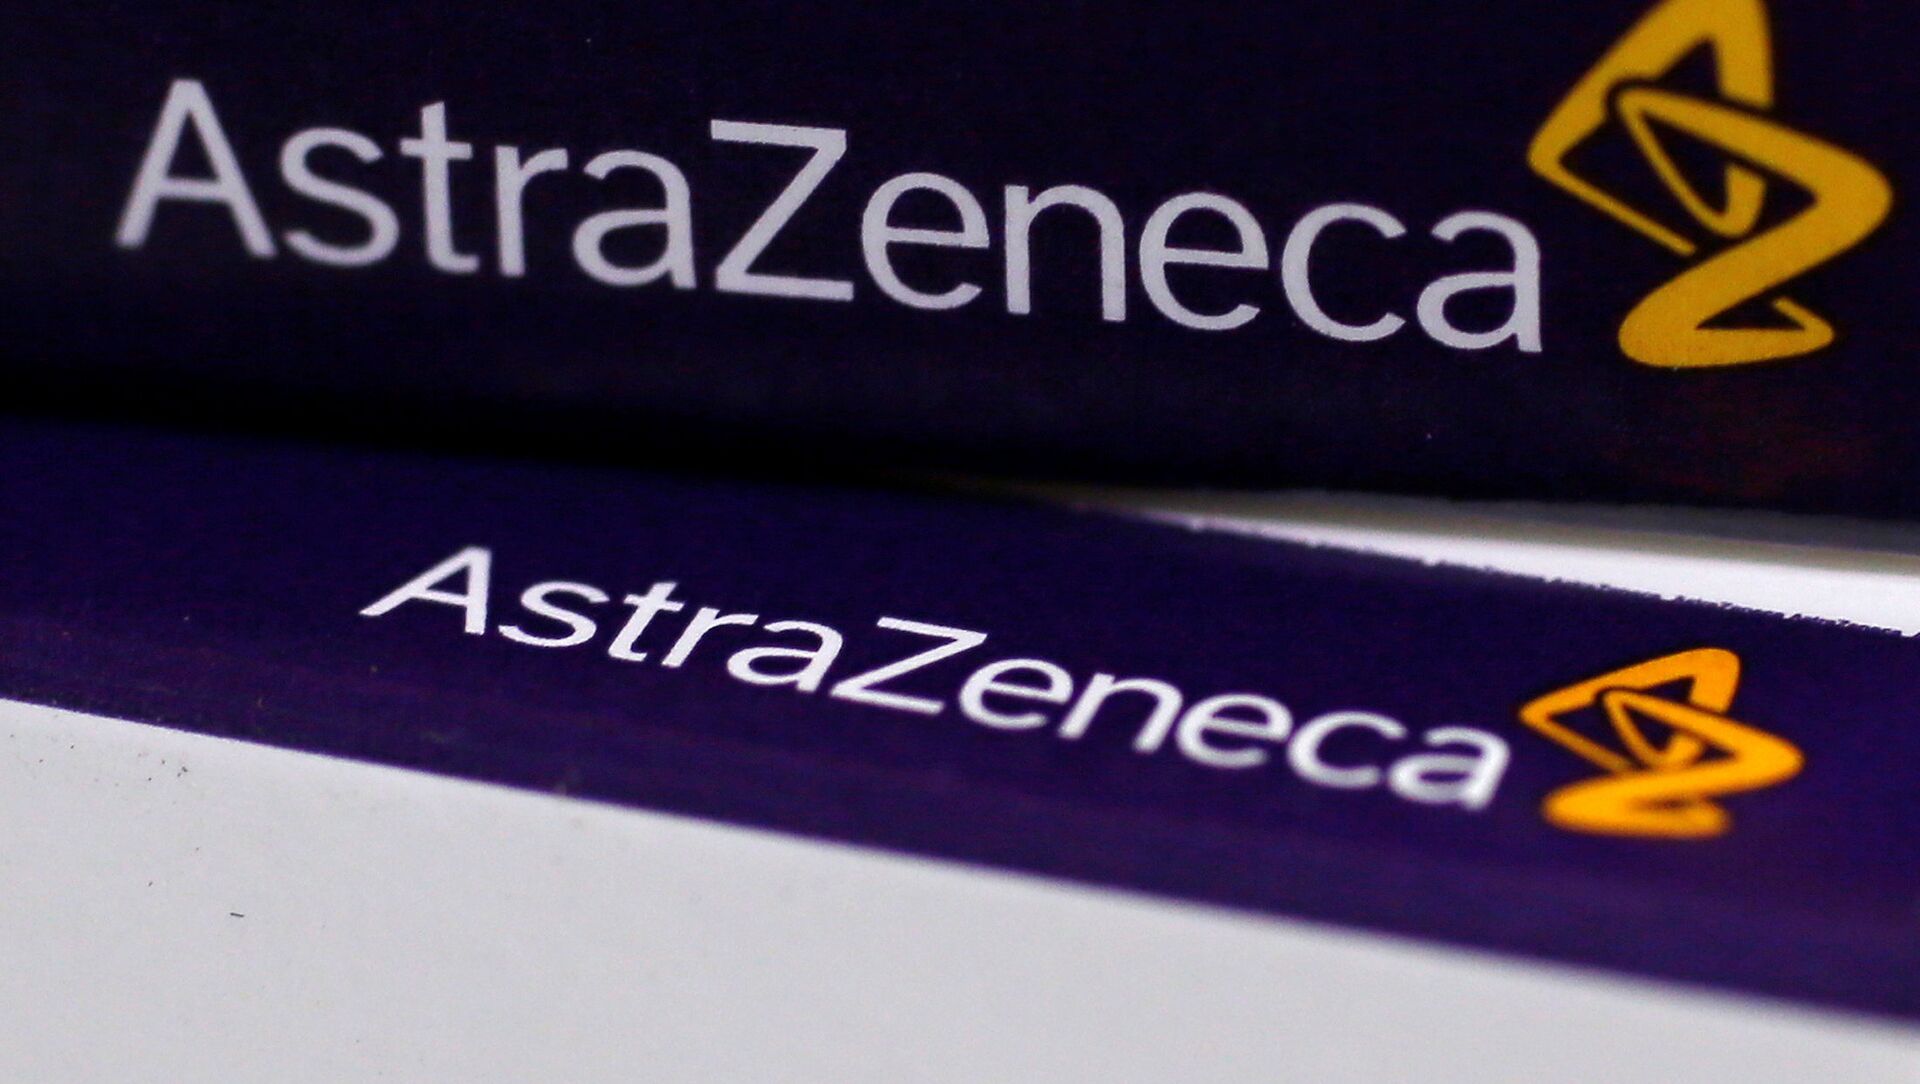 FILE PHOTO:The logo of AstraZeneca is seen on medication packages in a pharmacy in London. - Sputnik International, 1920, 01.02.2021